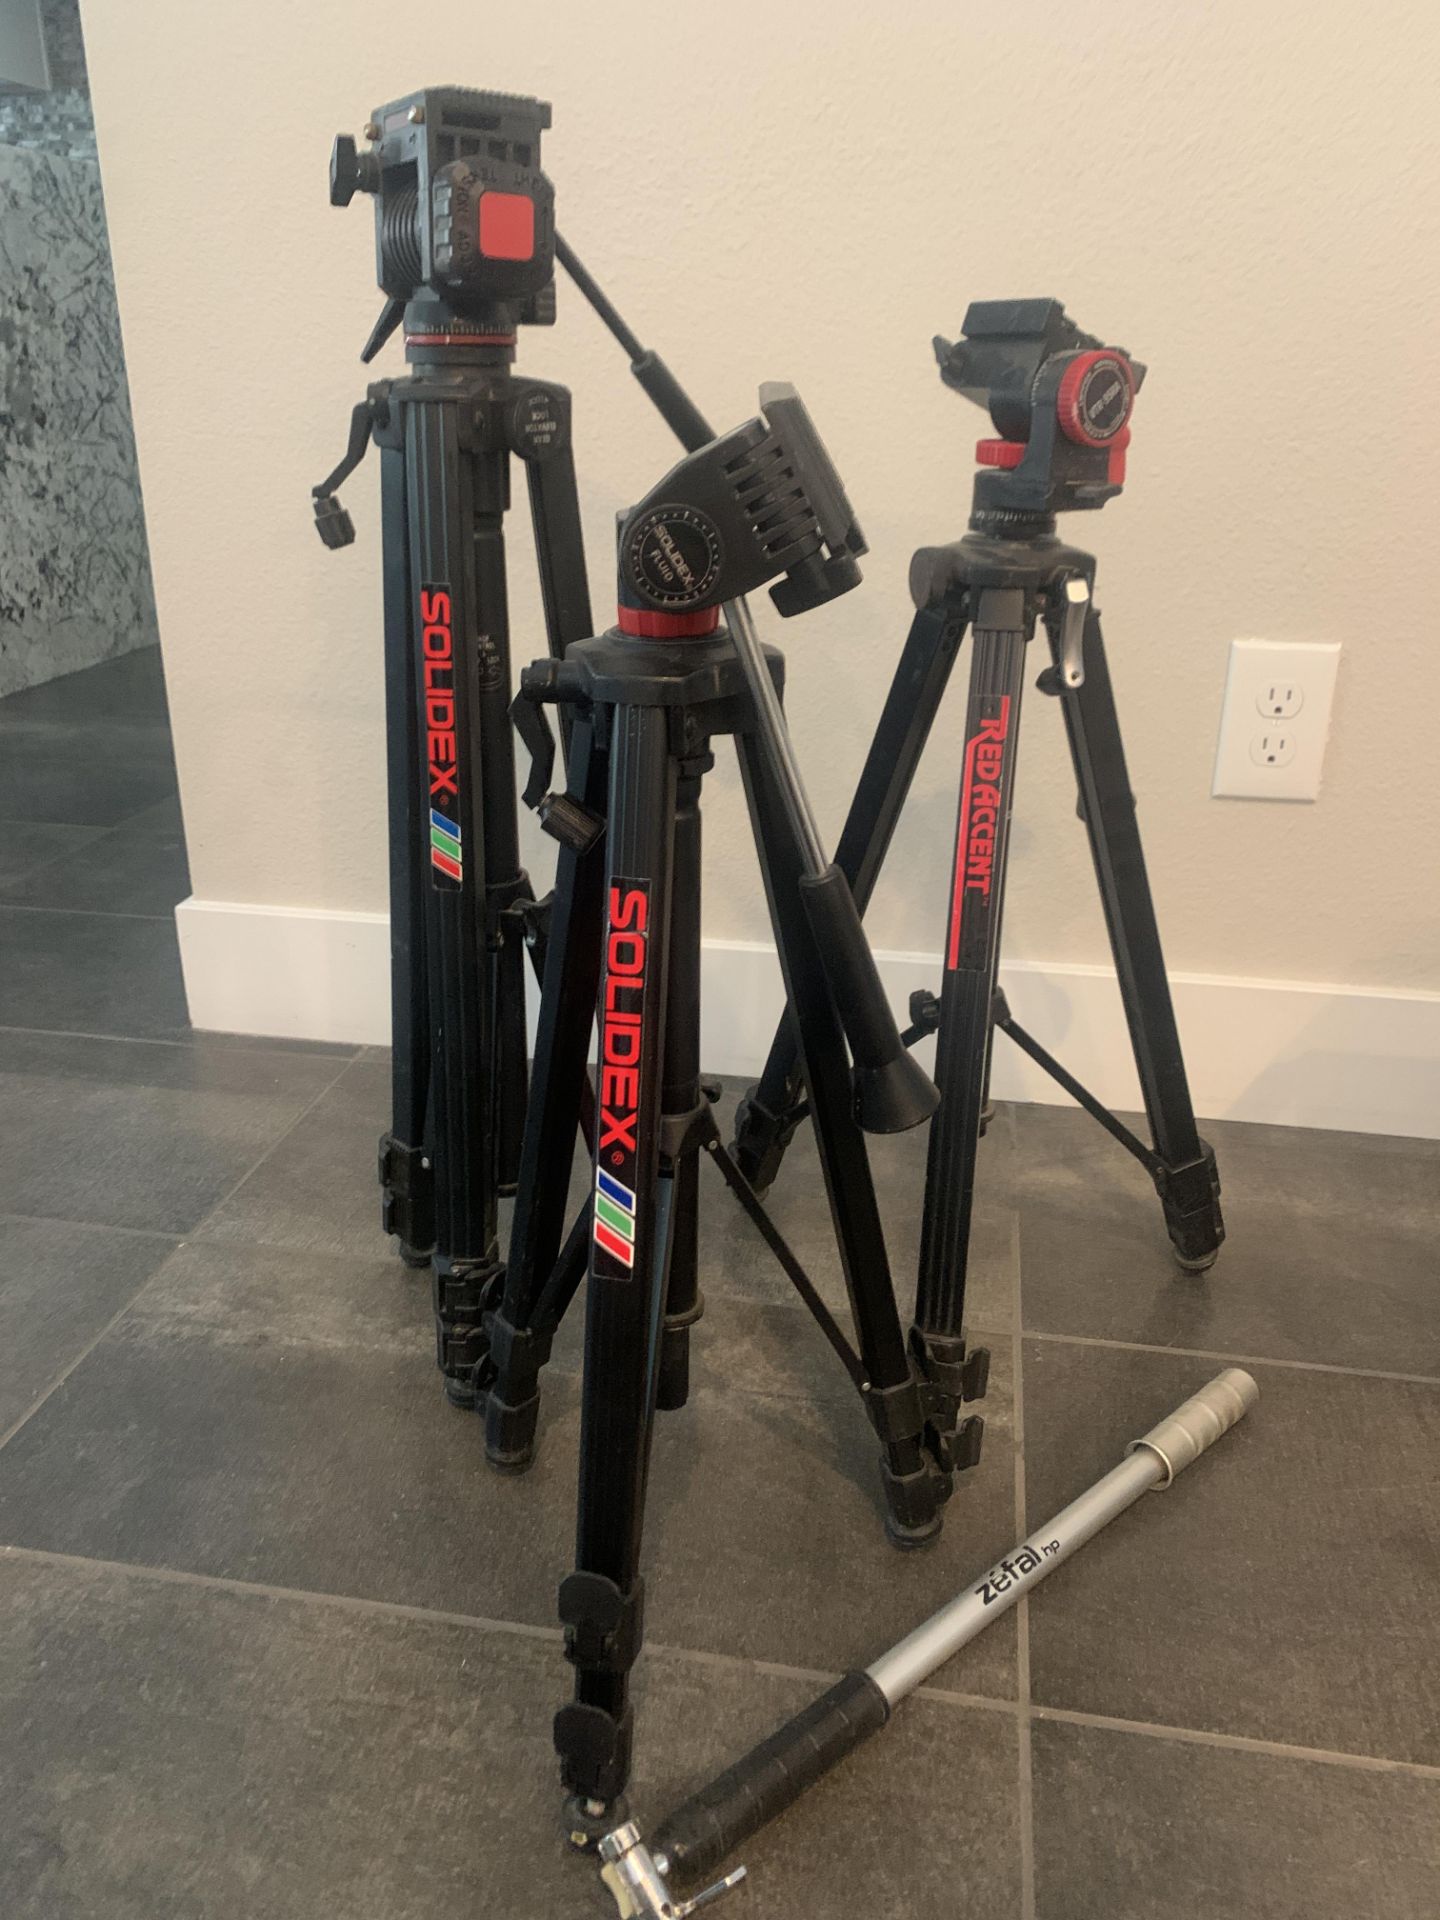 SOLIDEX PROFESSIONAL CAMERA FILMING TRIPODS - Image 3 of 3